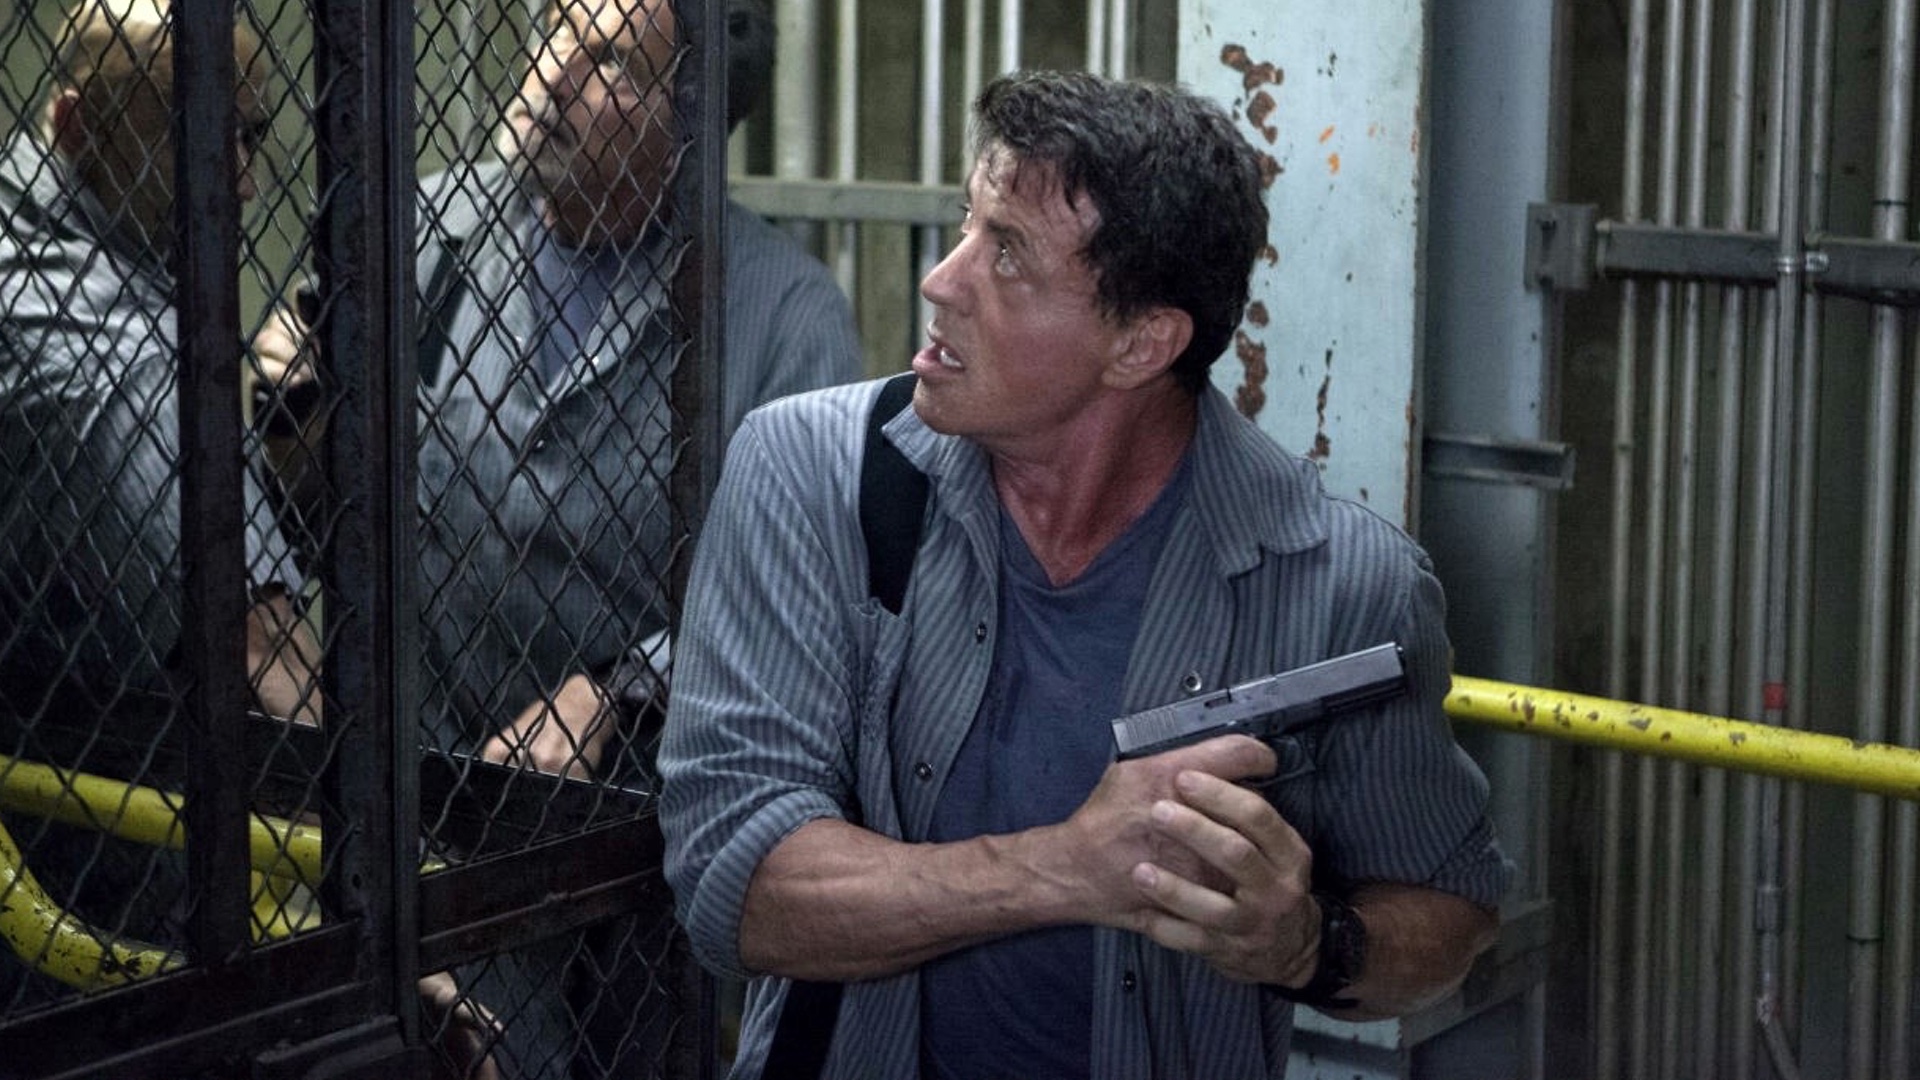 Sylvester Stallone From Escape Plan 2 Hades Wallpapers